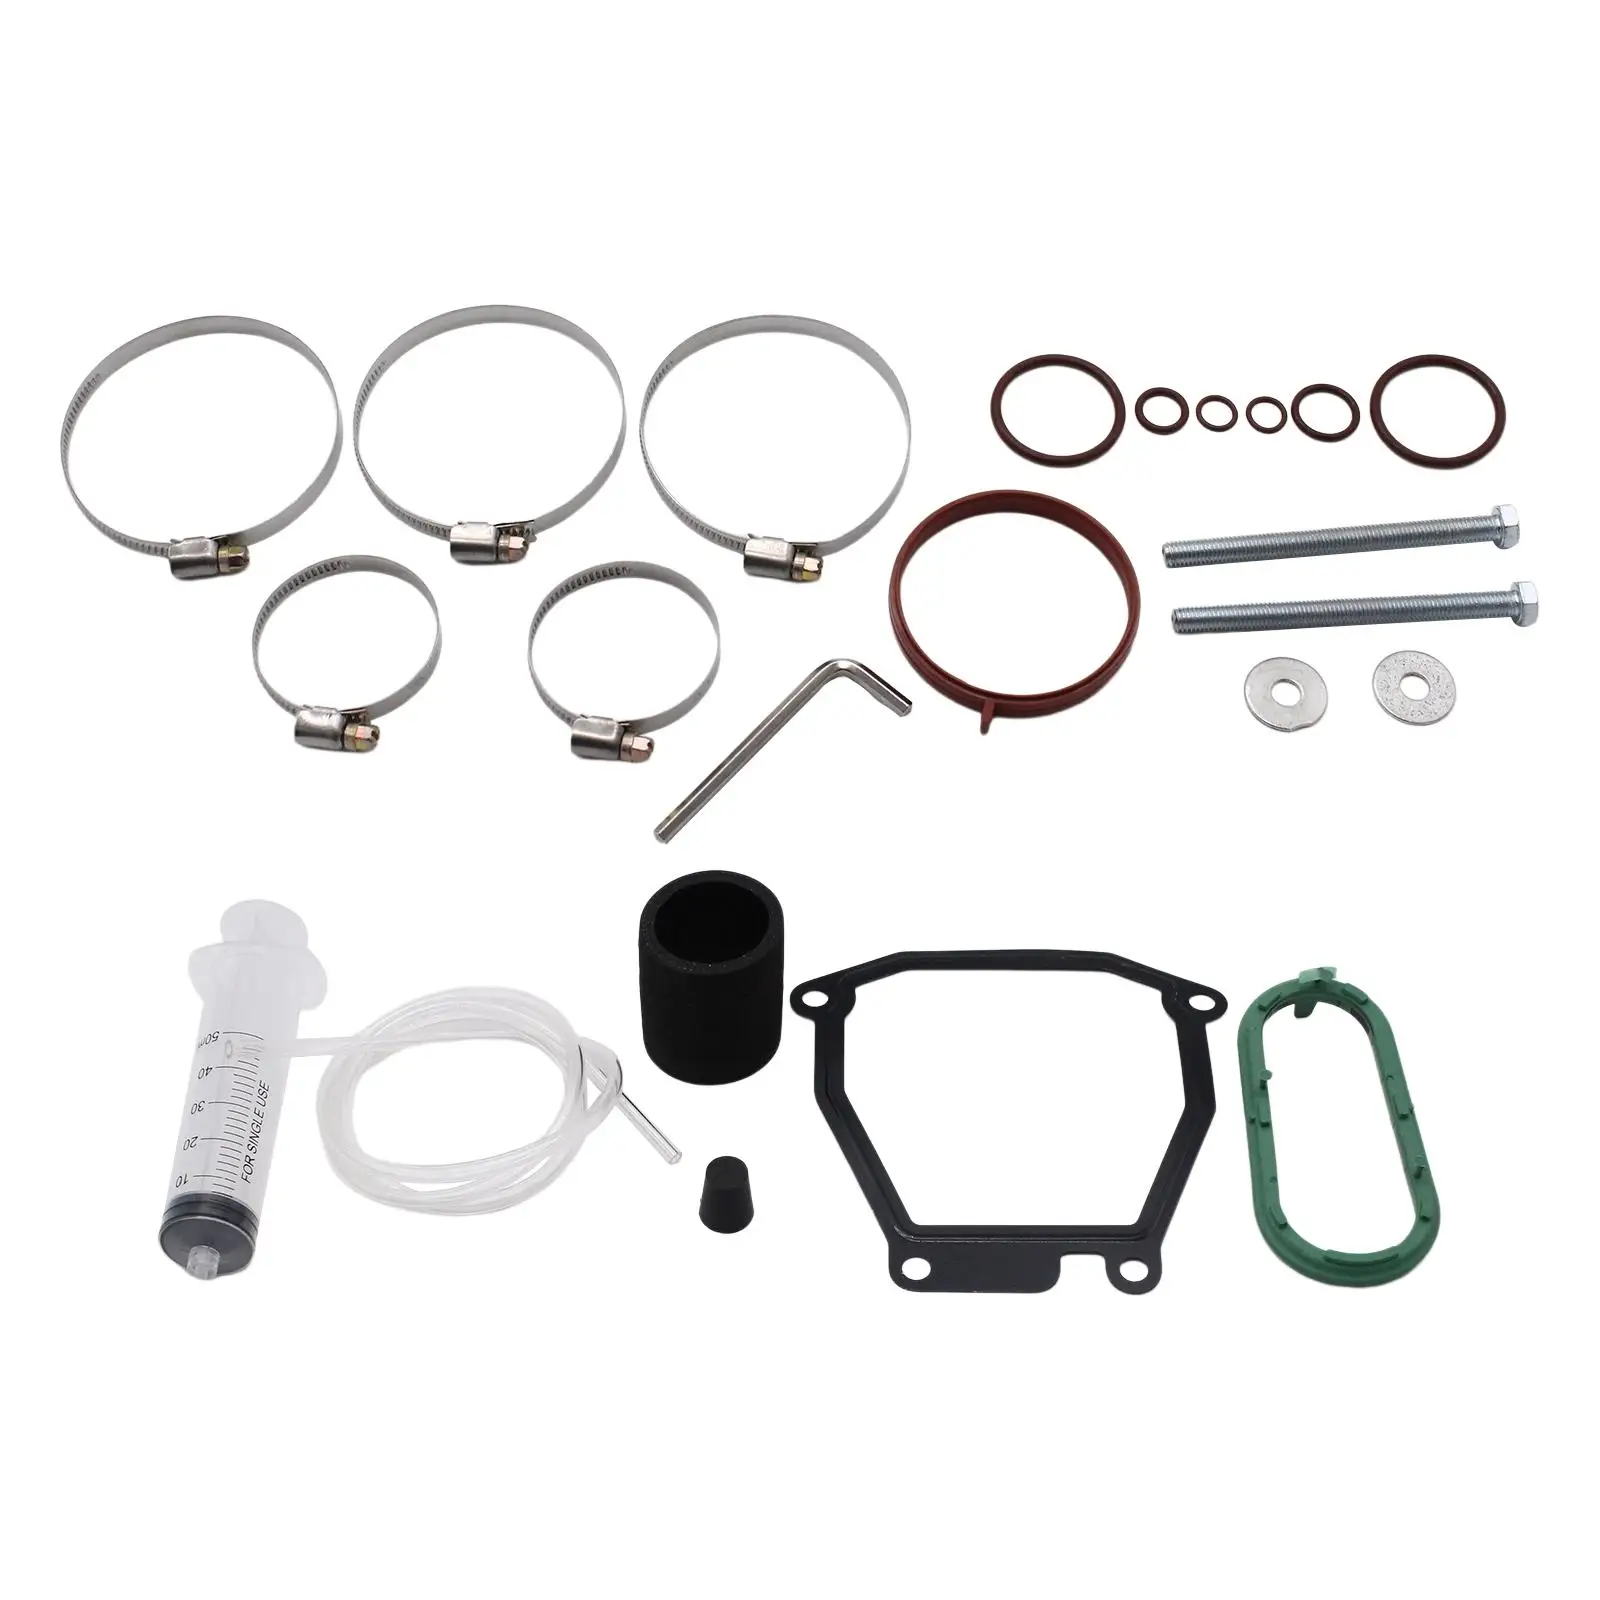 Supercharger Repair Kit Replaces for S R53 R52 High Performance